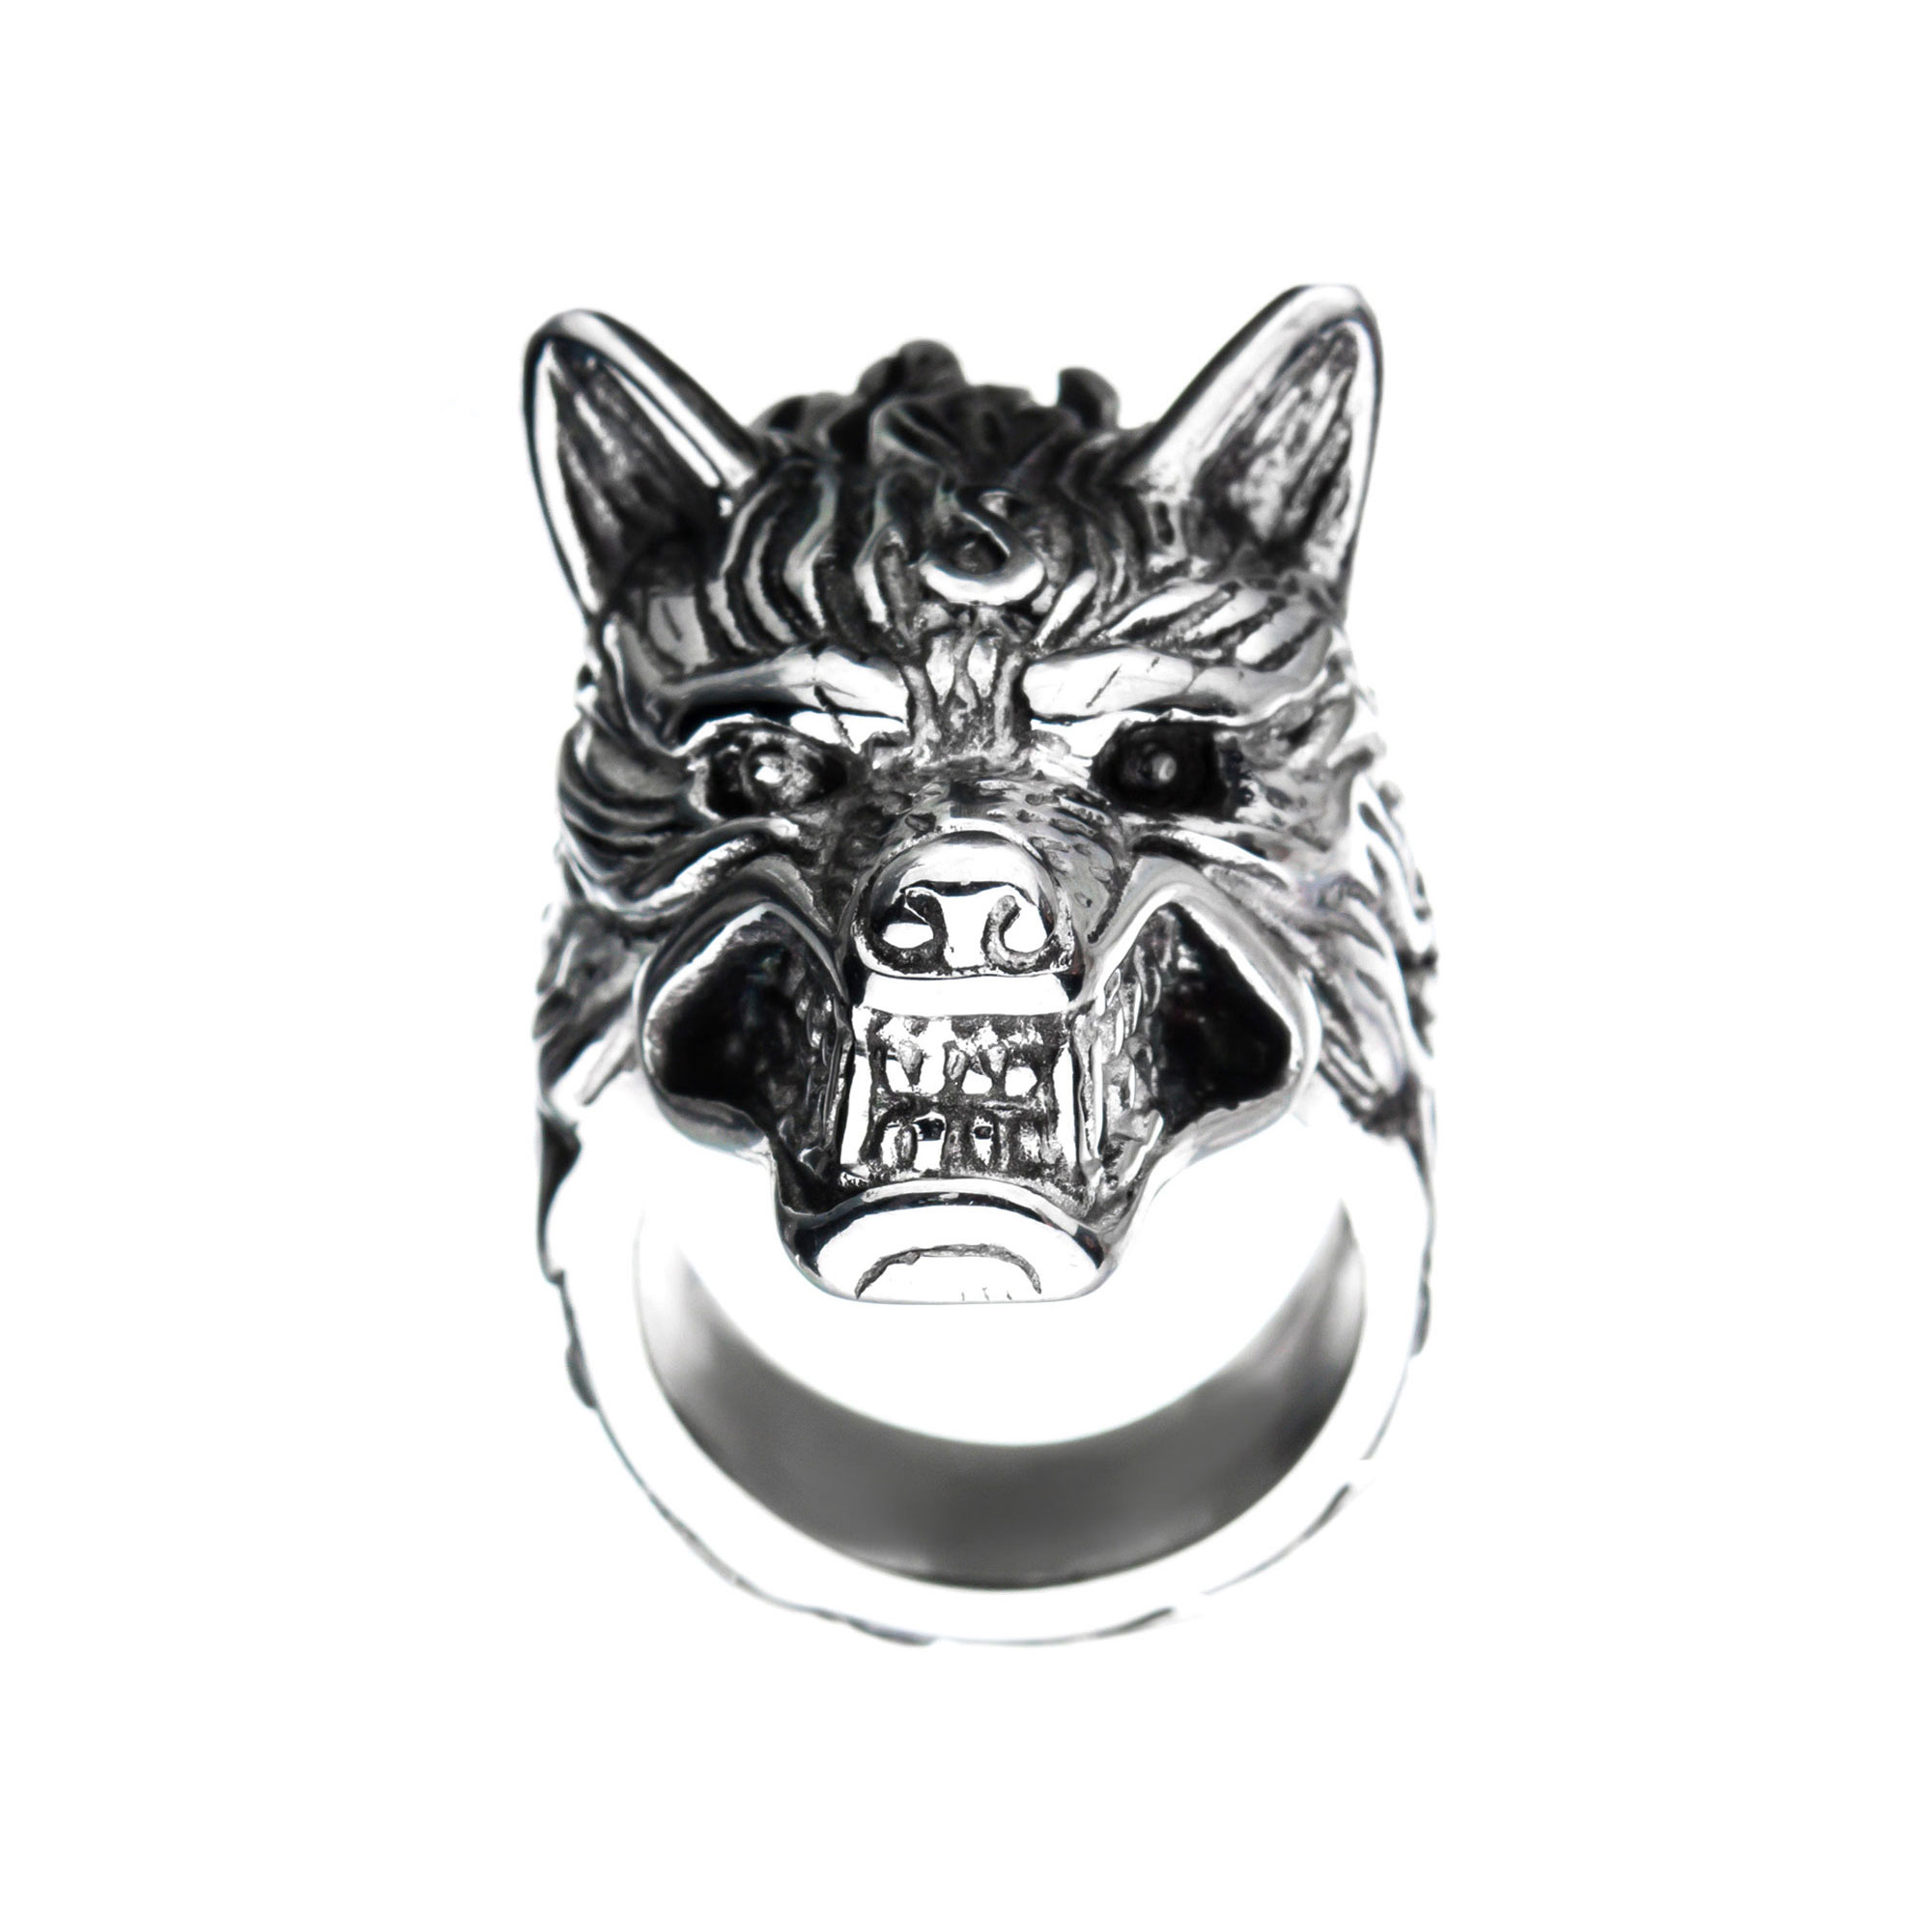 Stainless Steel 3D Wolf Ring Image 2 Enchanted Jewelry Plainfield, CT